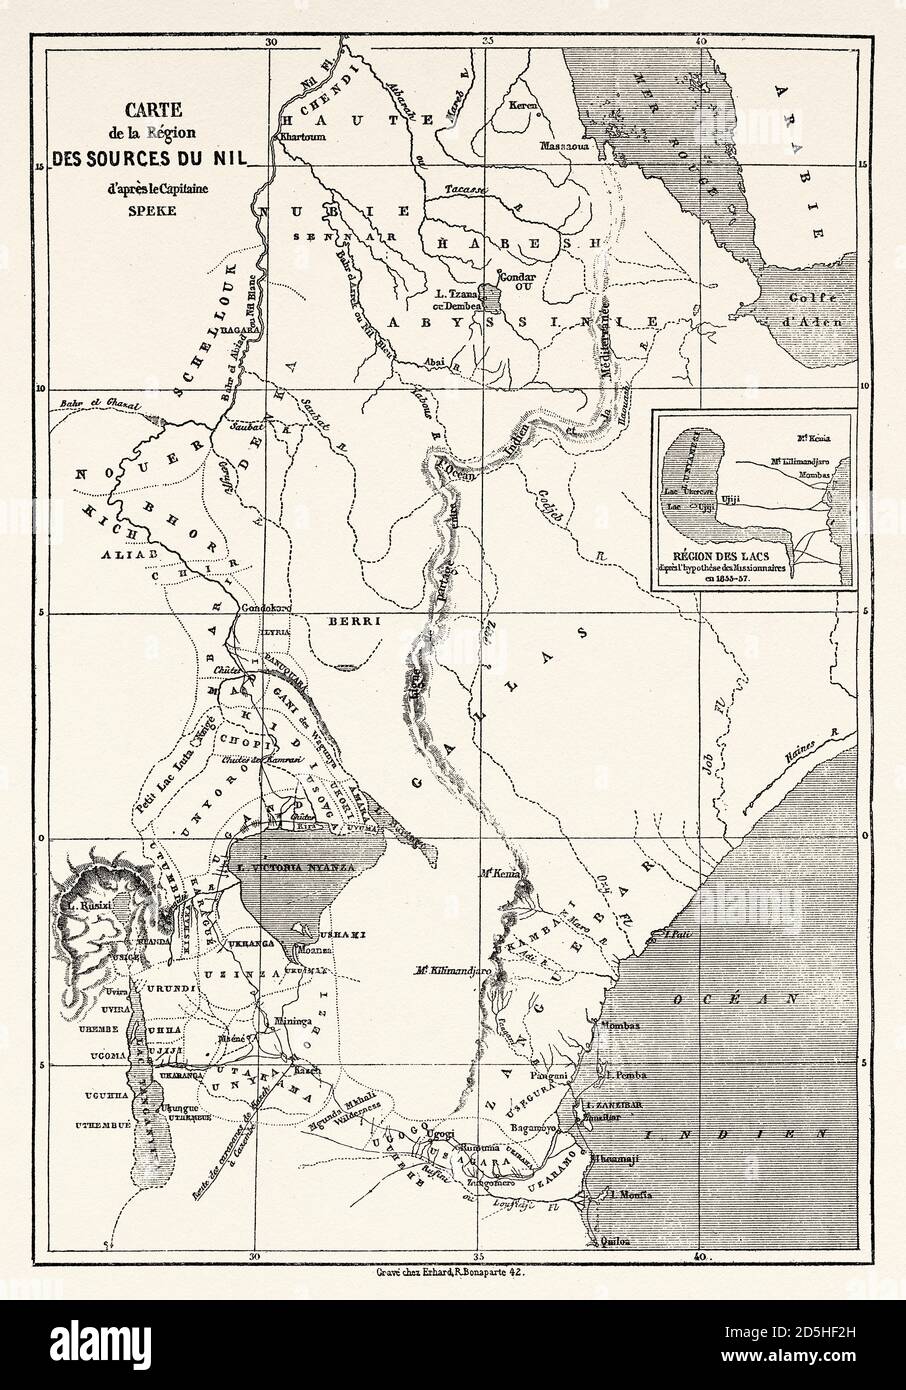 Old map of Nile sources region, Africa. Old XIX century engraved from Le Tour du Monde 1864 Stock Photo